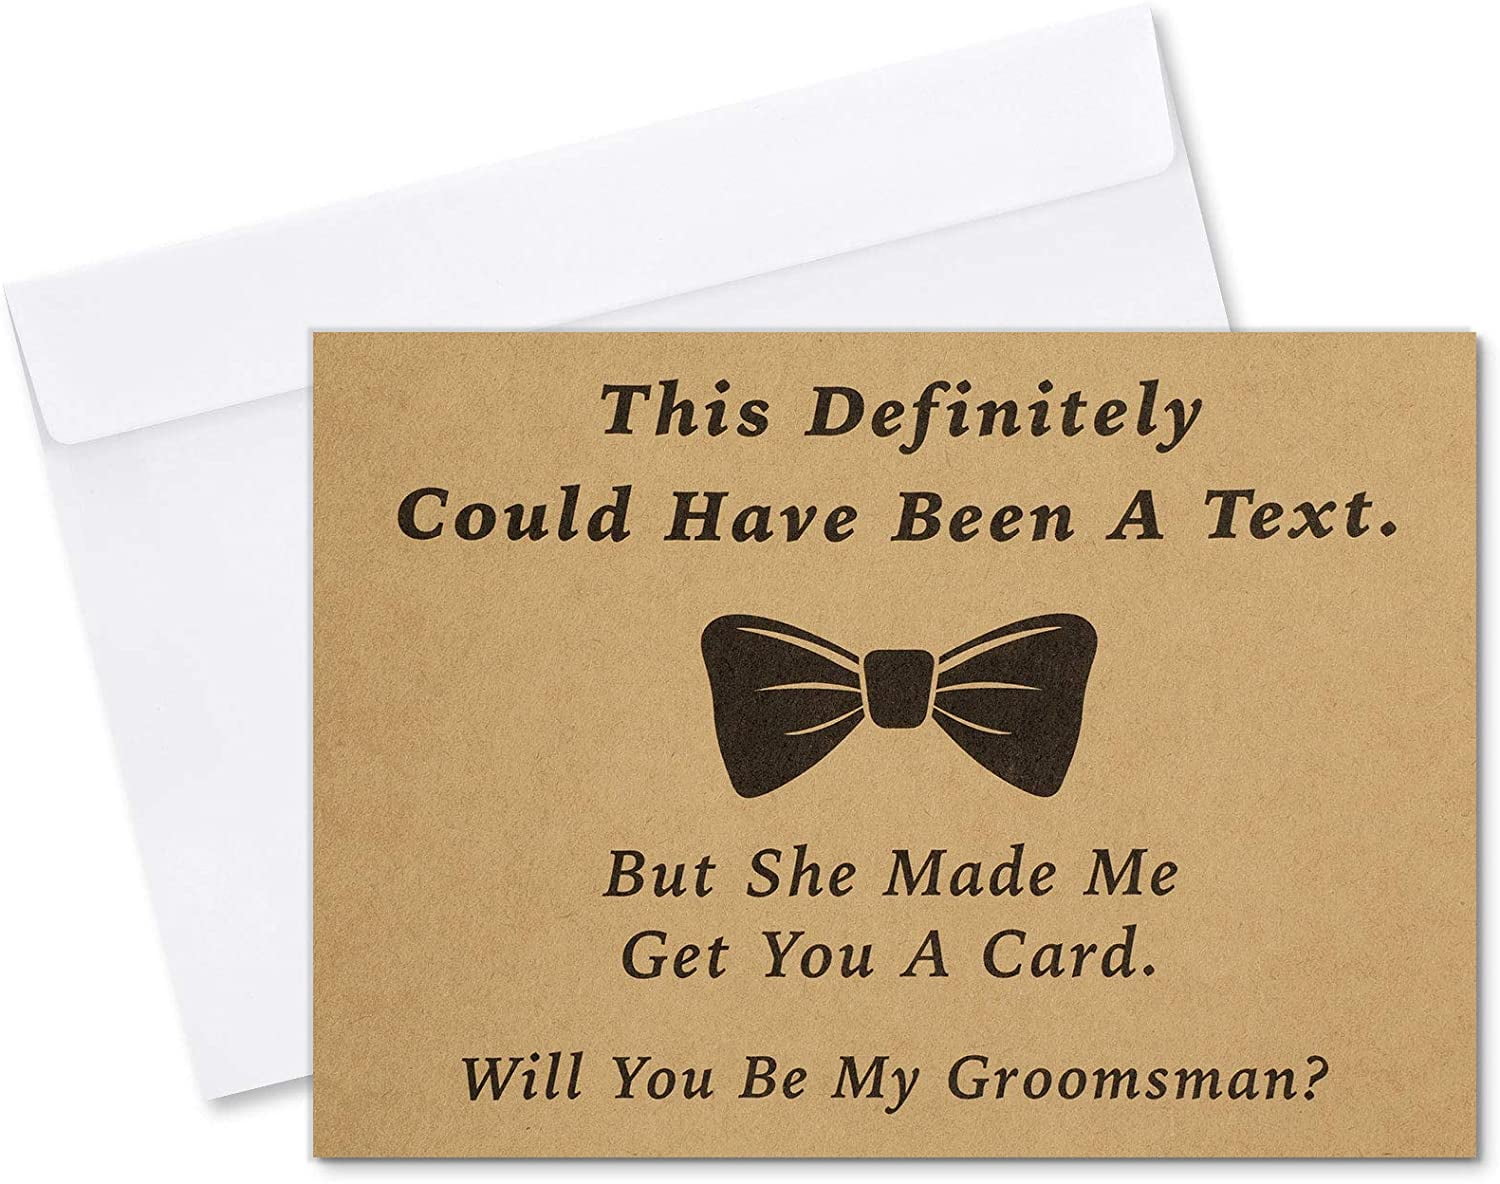 Groomsman Proposal Cards by Hat Acrobat 8 Will You Be My Groomsman and 2 Best Man Cards with Envelopes Set of 10 Groomsmen Cards 